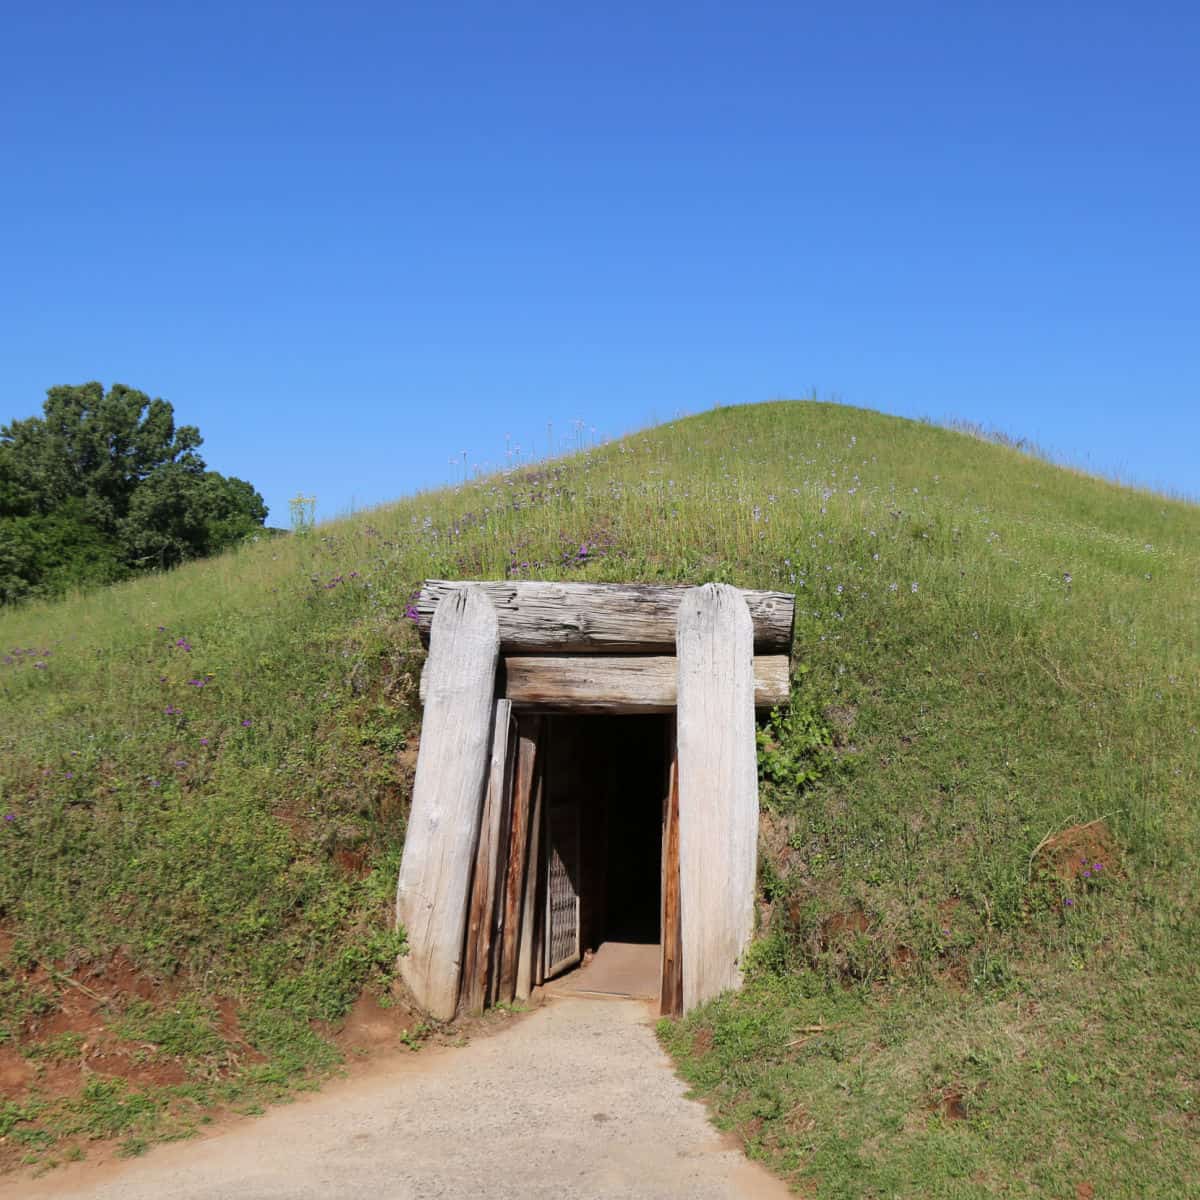 Ocmulgee Mounds National Historical Park in Georgia